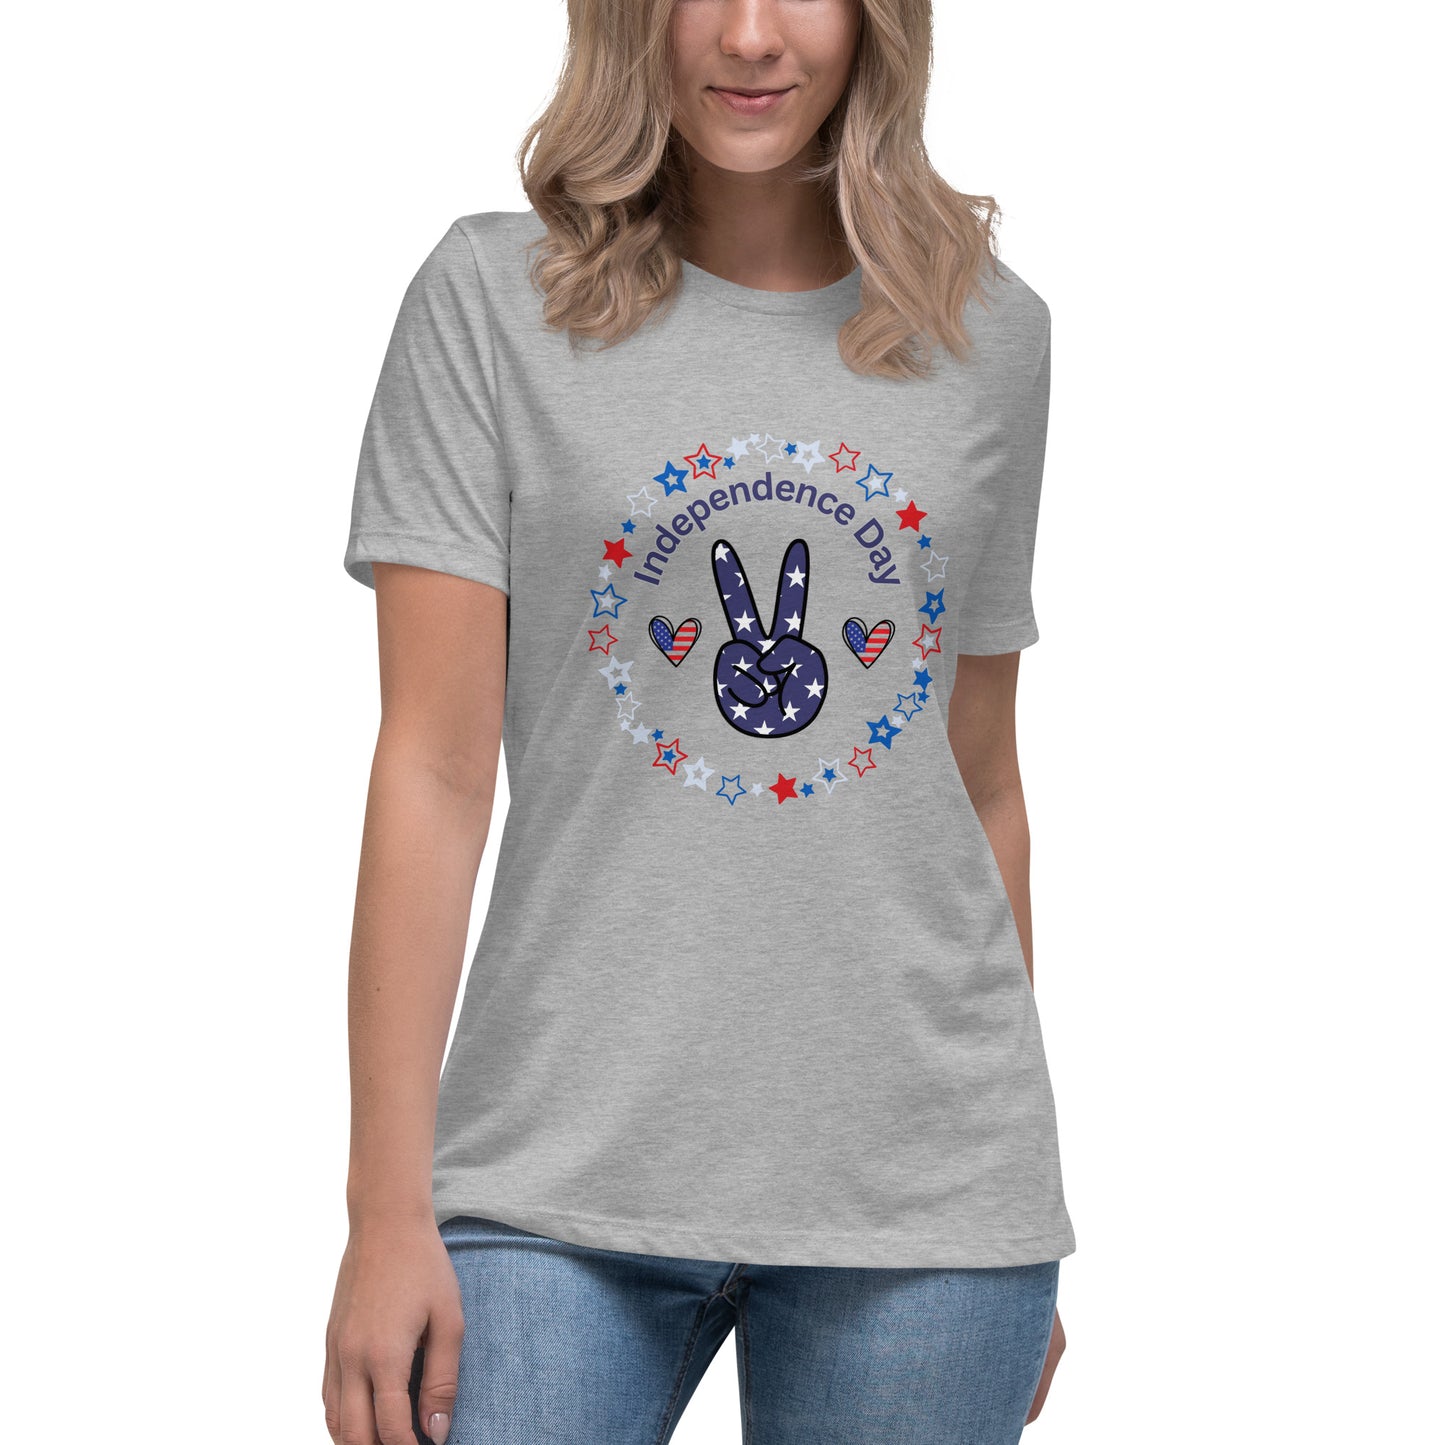 Women's Relaxed T-Shirt - Independence Day 4th of July T-shirt Stylin' Spirit Athletic Heather S 